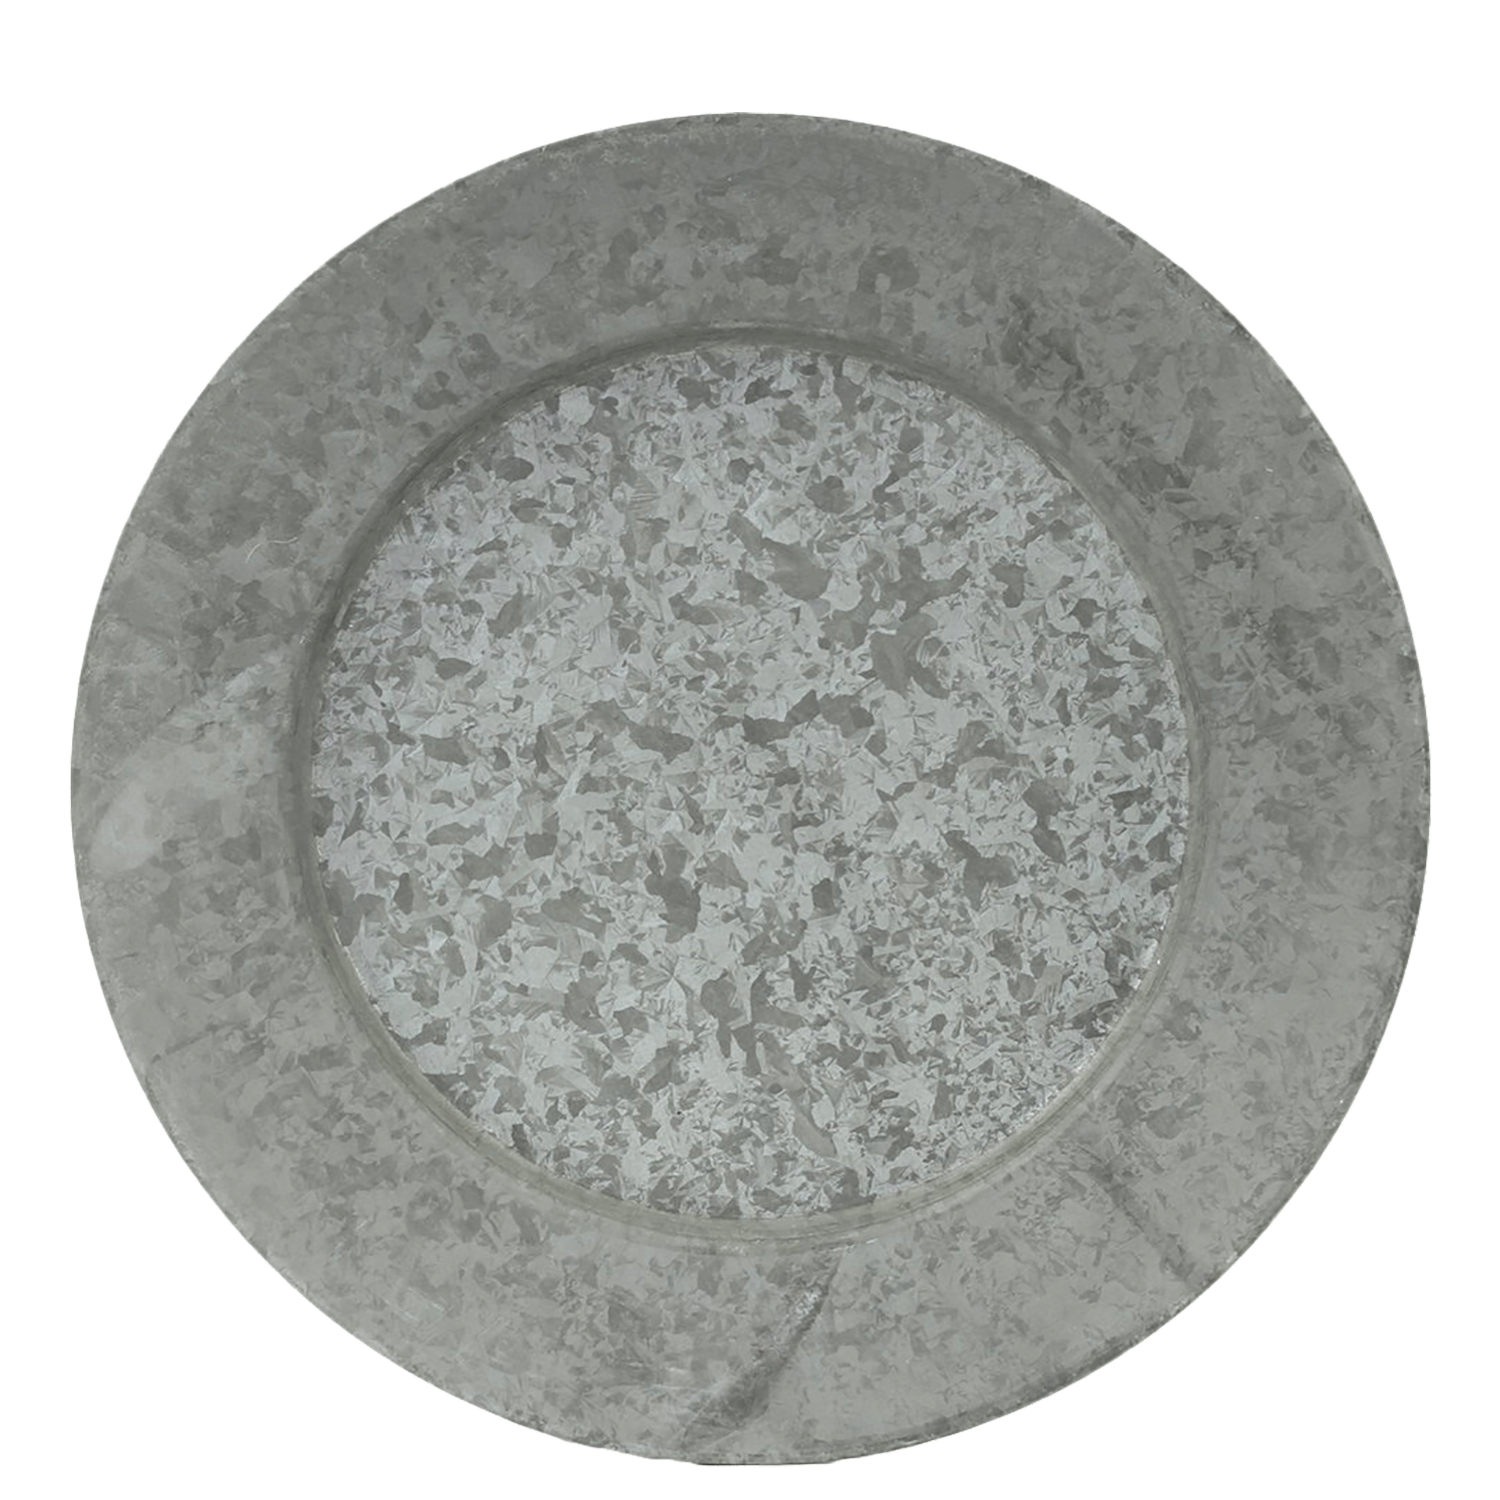 Galvanized charger plates